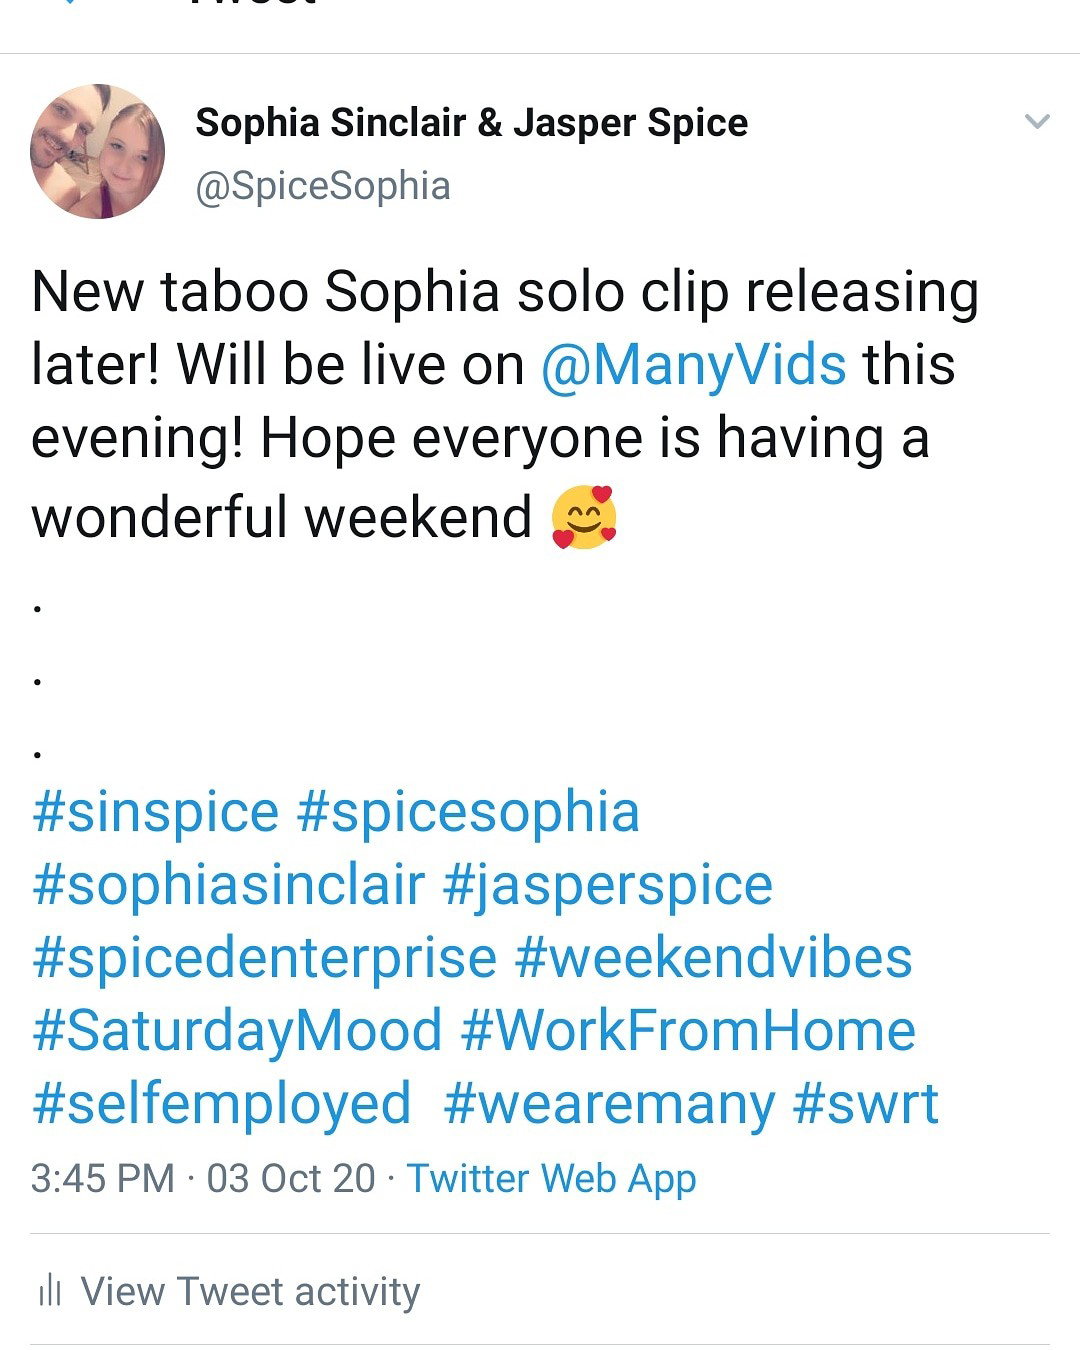 Photo by SpicedEnterprise with the username @spicesophia, who is a star user,  October 3, 2020 at 9:10 PM and the text says '#wearemany #newcontentalert #clips #newvideo #SophiaandJasper #sophiasinclair #SinSpice #SpiceSophia #jasperspice'